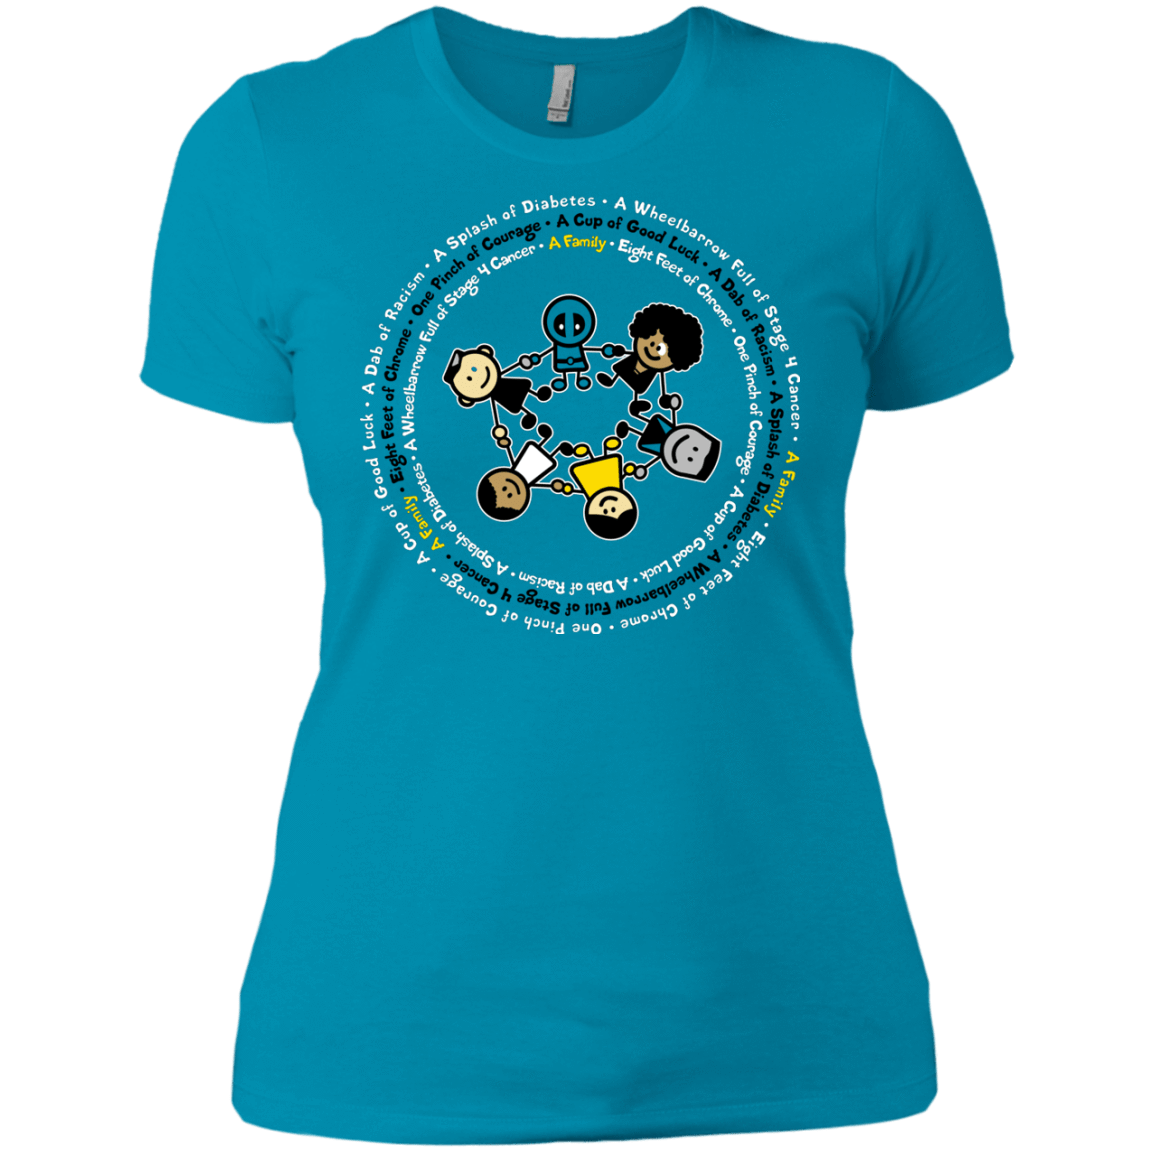 T-Shirts Turquoise / X-Small Support Family Women's Premium T-Shirt